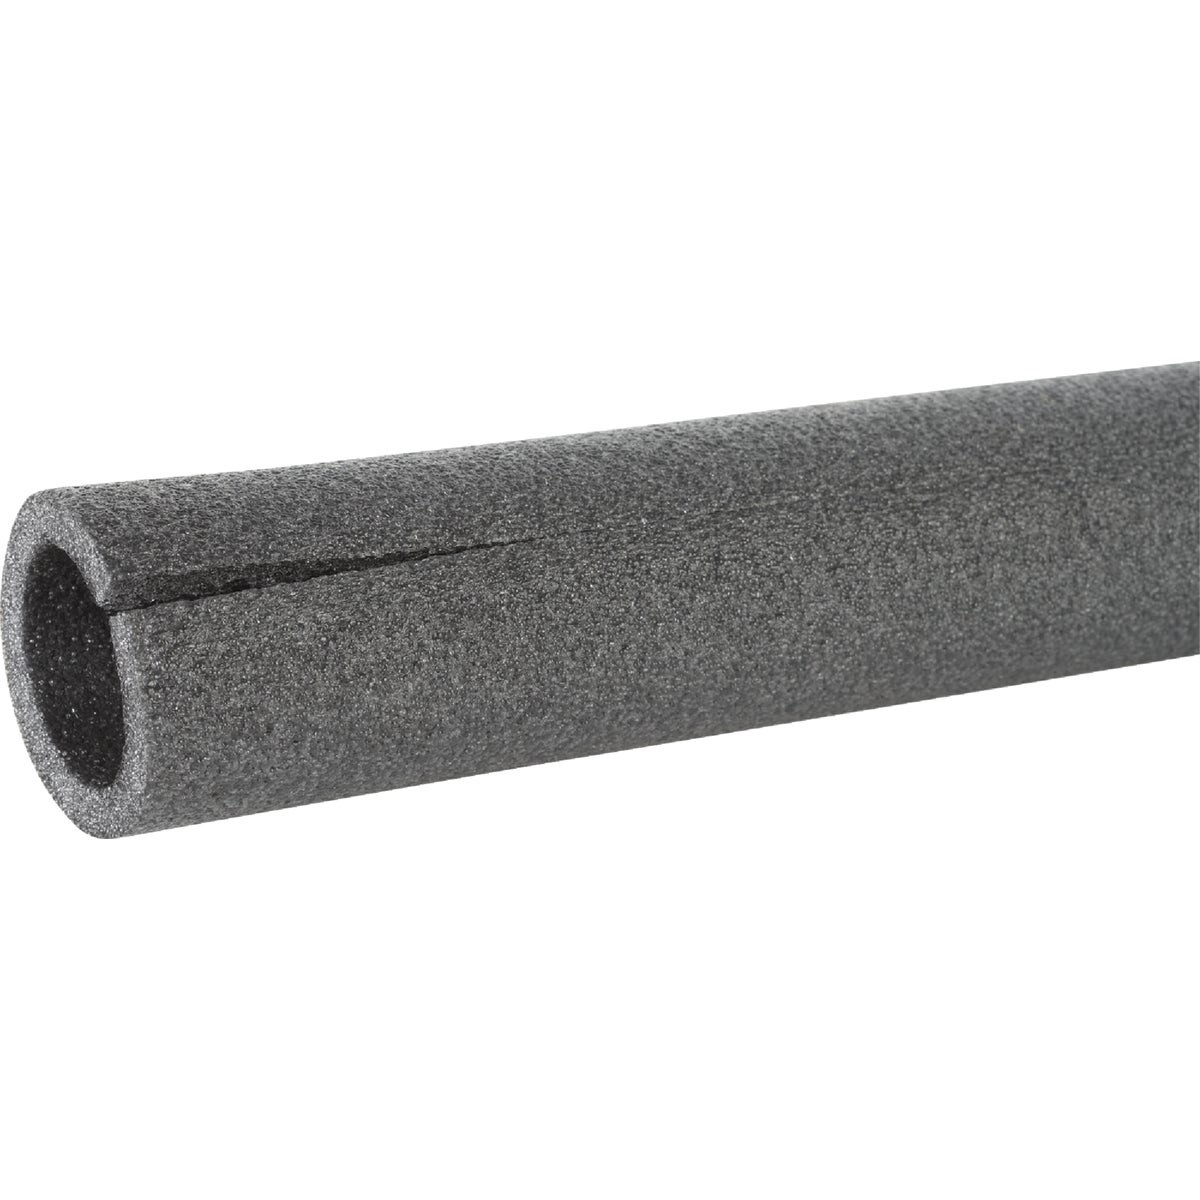 Tundra 1/2 In. Wall Semi-Slit Polyethylene Pipe Insulation Wrap, 1-1/4 In. x 6 Ft. Fits Pipe Size 1-1/4 In. Copper/ 1 In. Iron